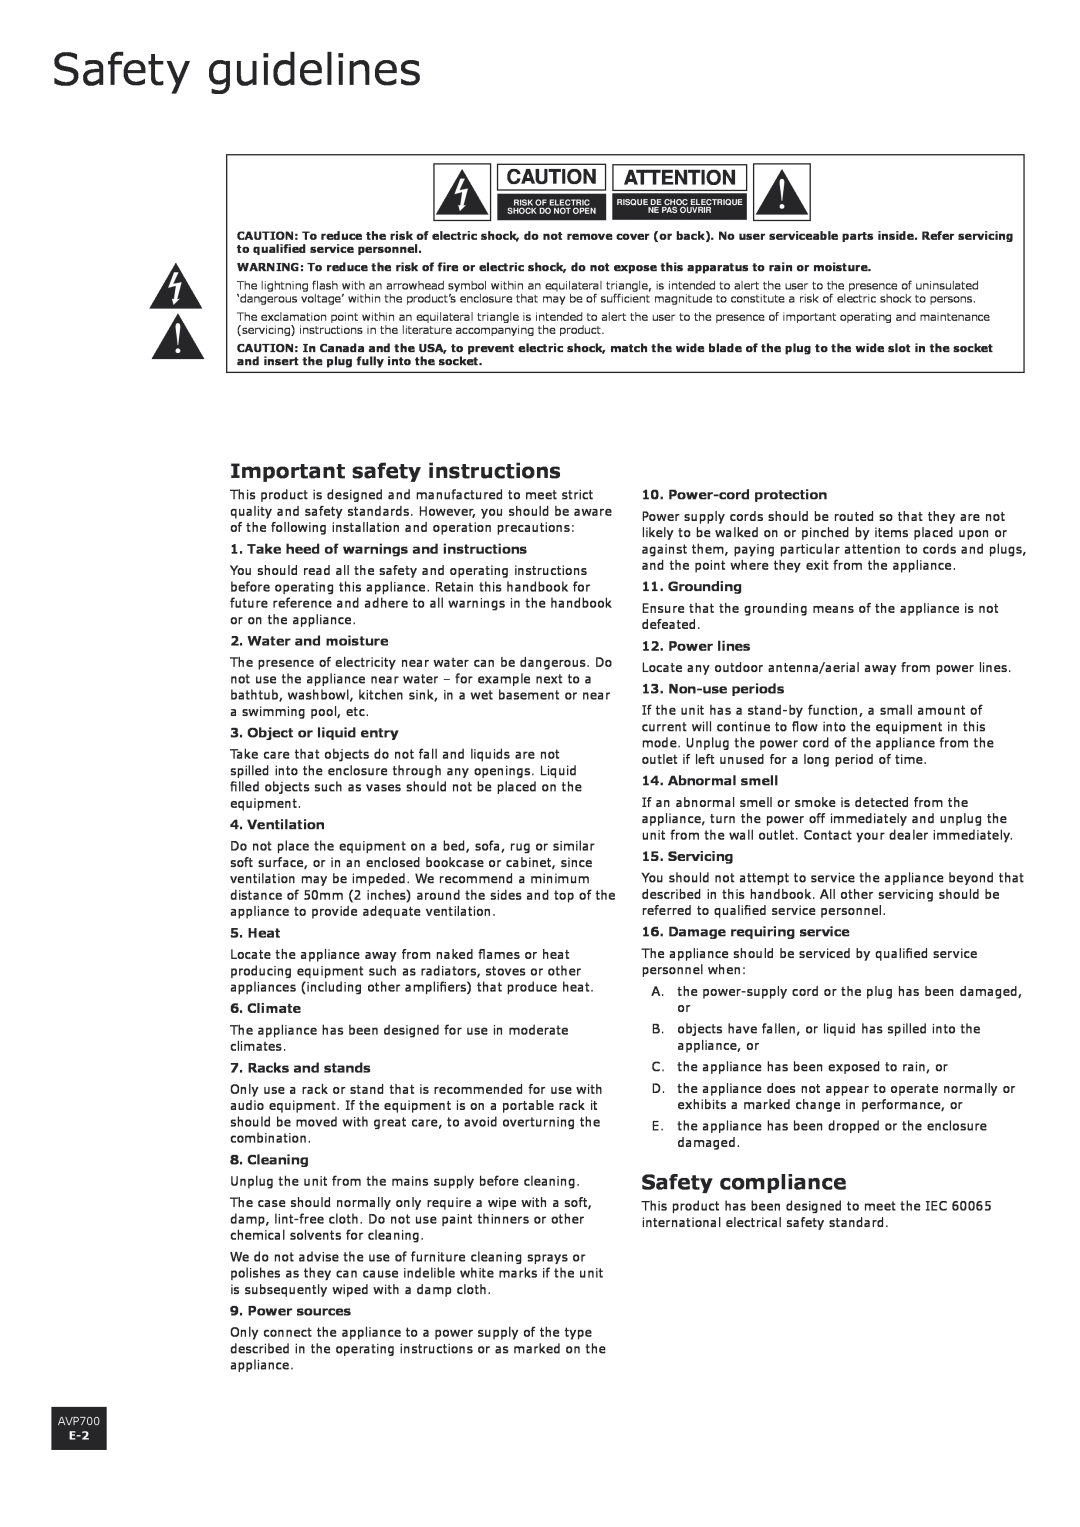 Arcam AVP700 manual Safety guidelines, Important safety instructions, Safety compliance, Caution Attention 